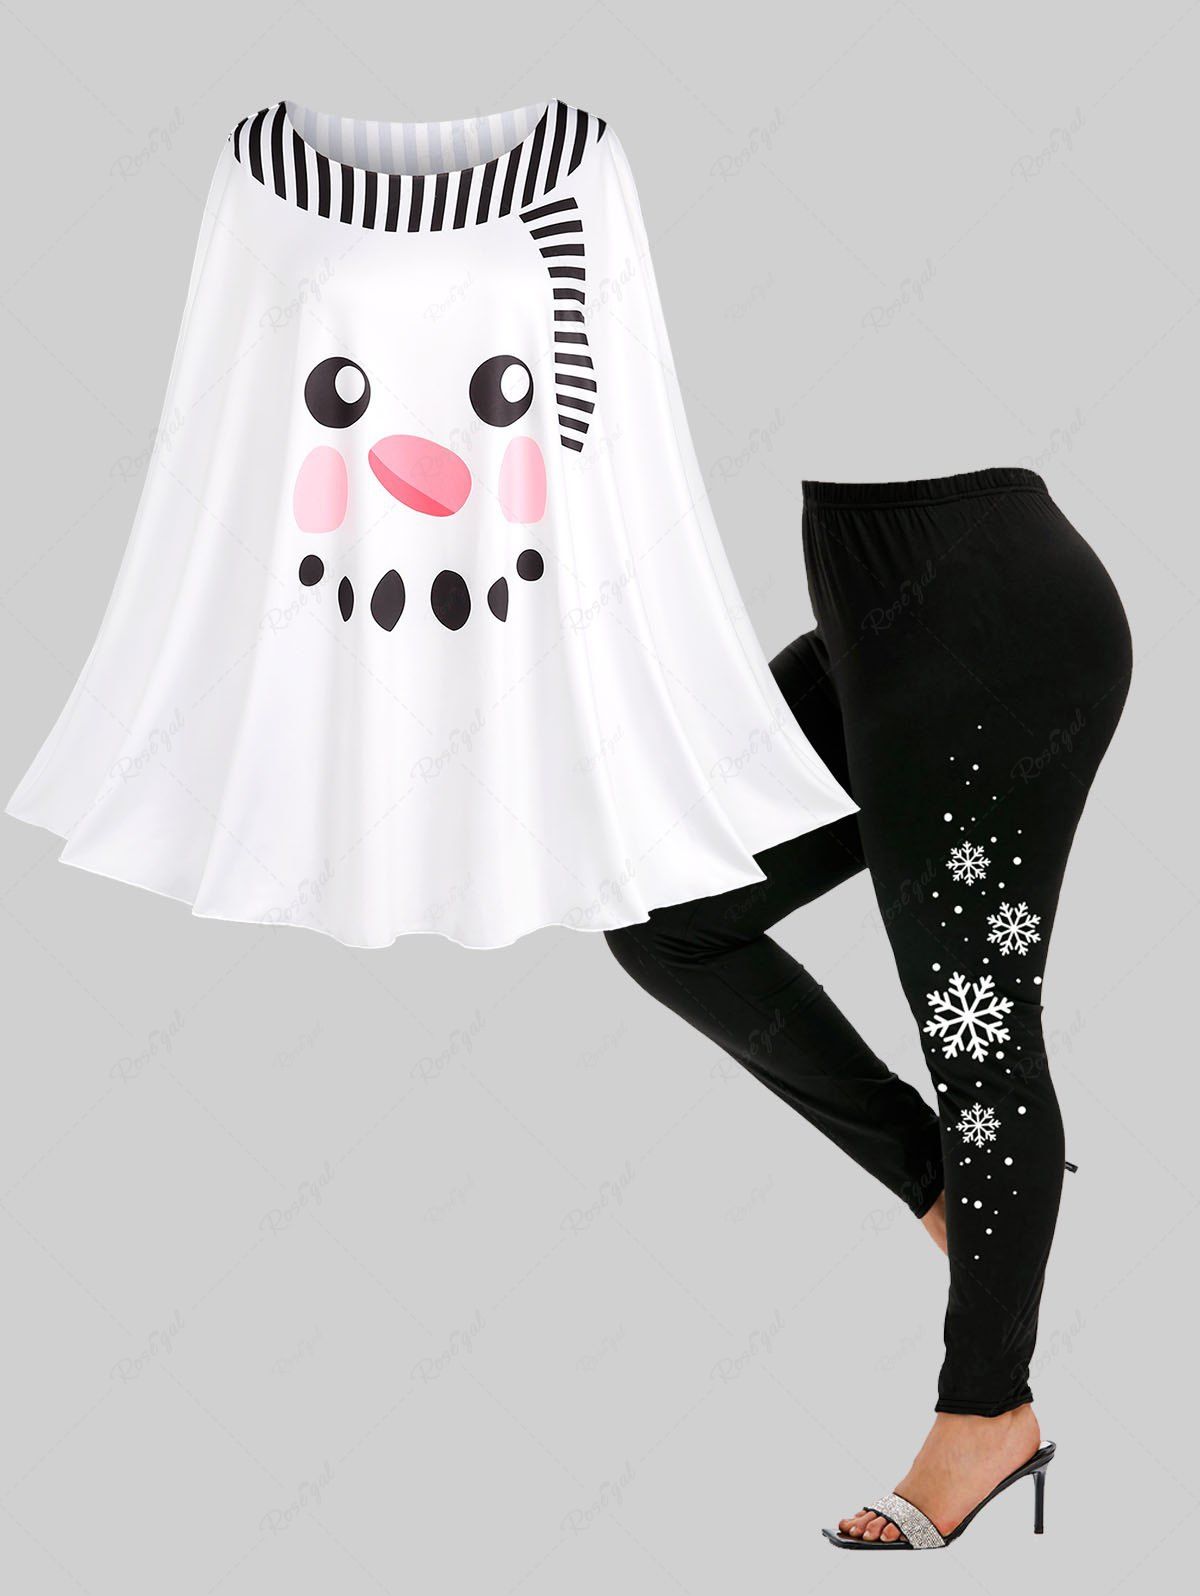 Shops Christmas Snowman Scarf Printed Shawl Handkerchief Cape and Snowflake Print Leggings Plus Size Outfit  